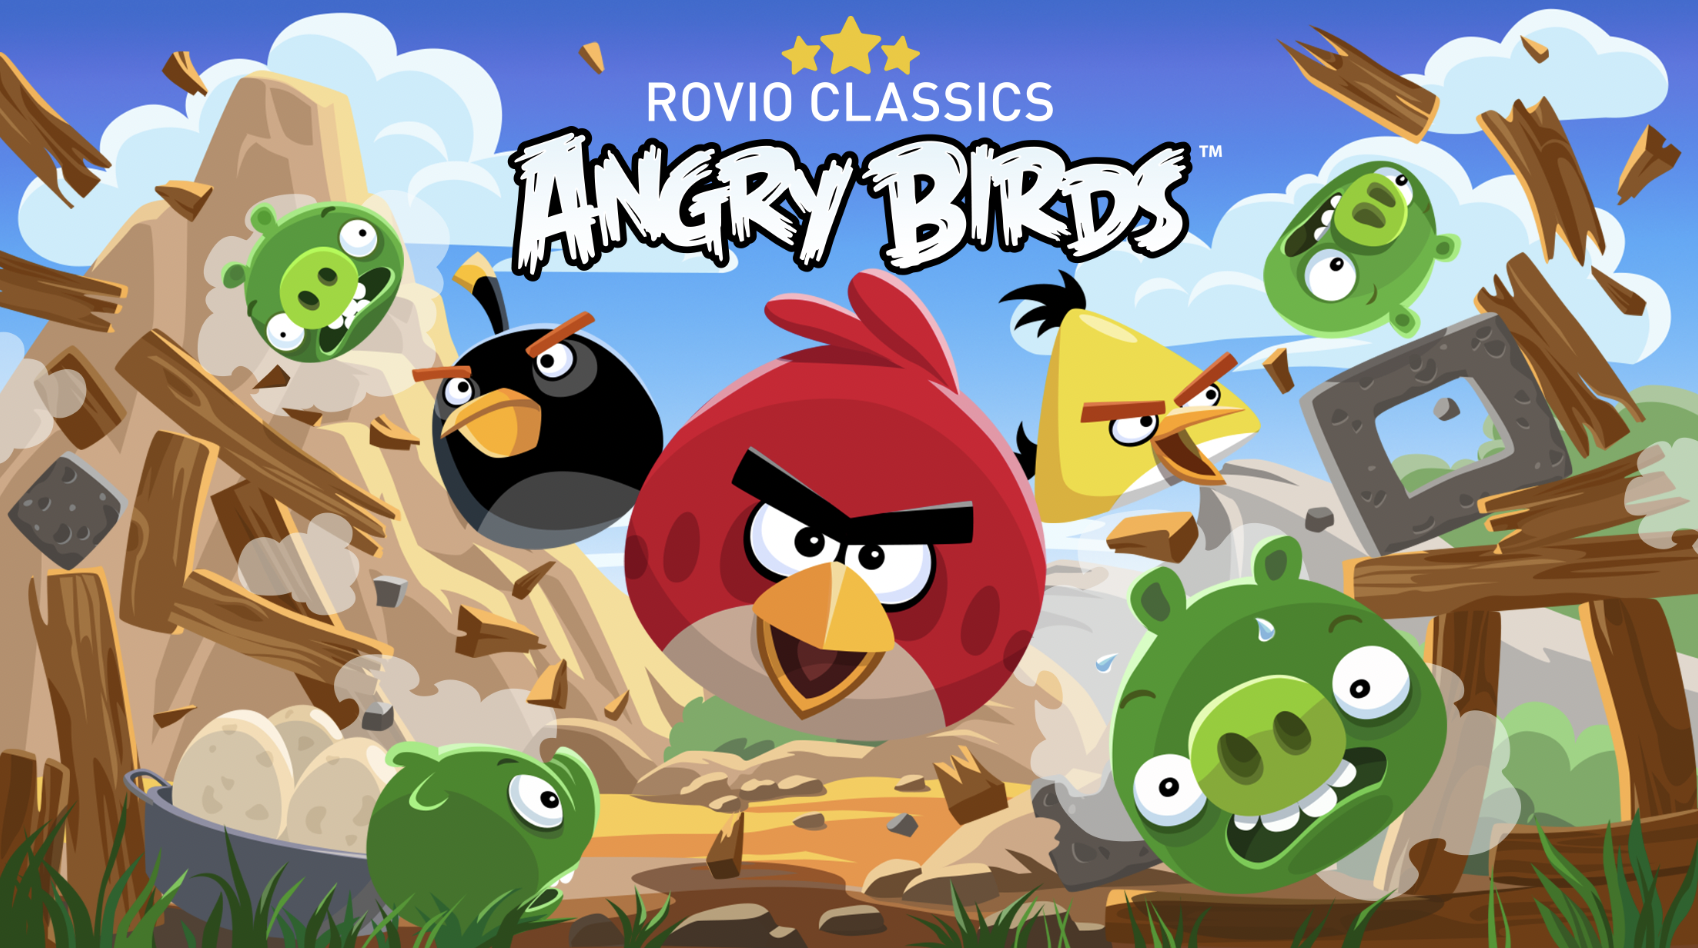 Original Rovio Classics: Angry Birds Game Being Delisted